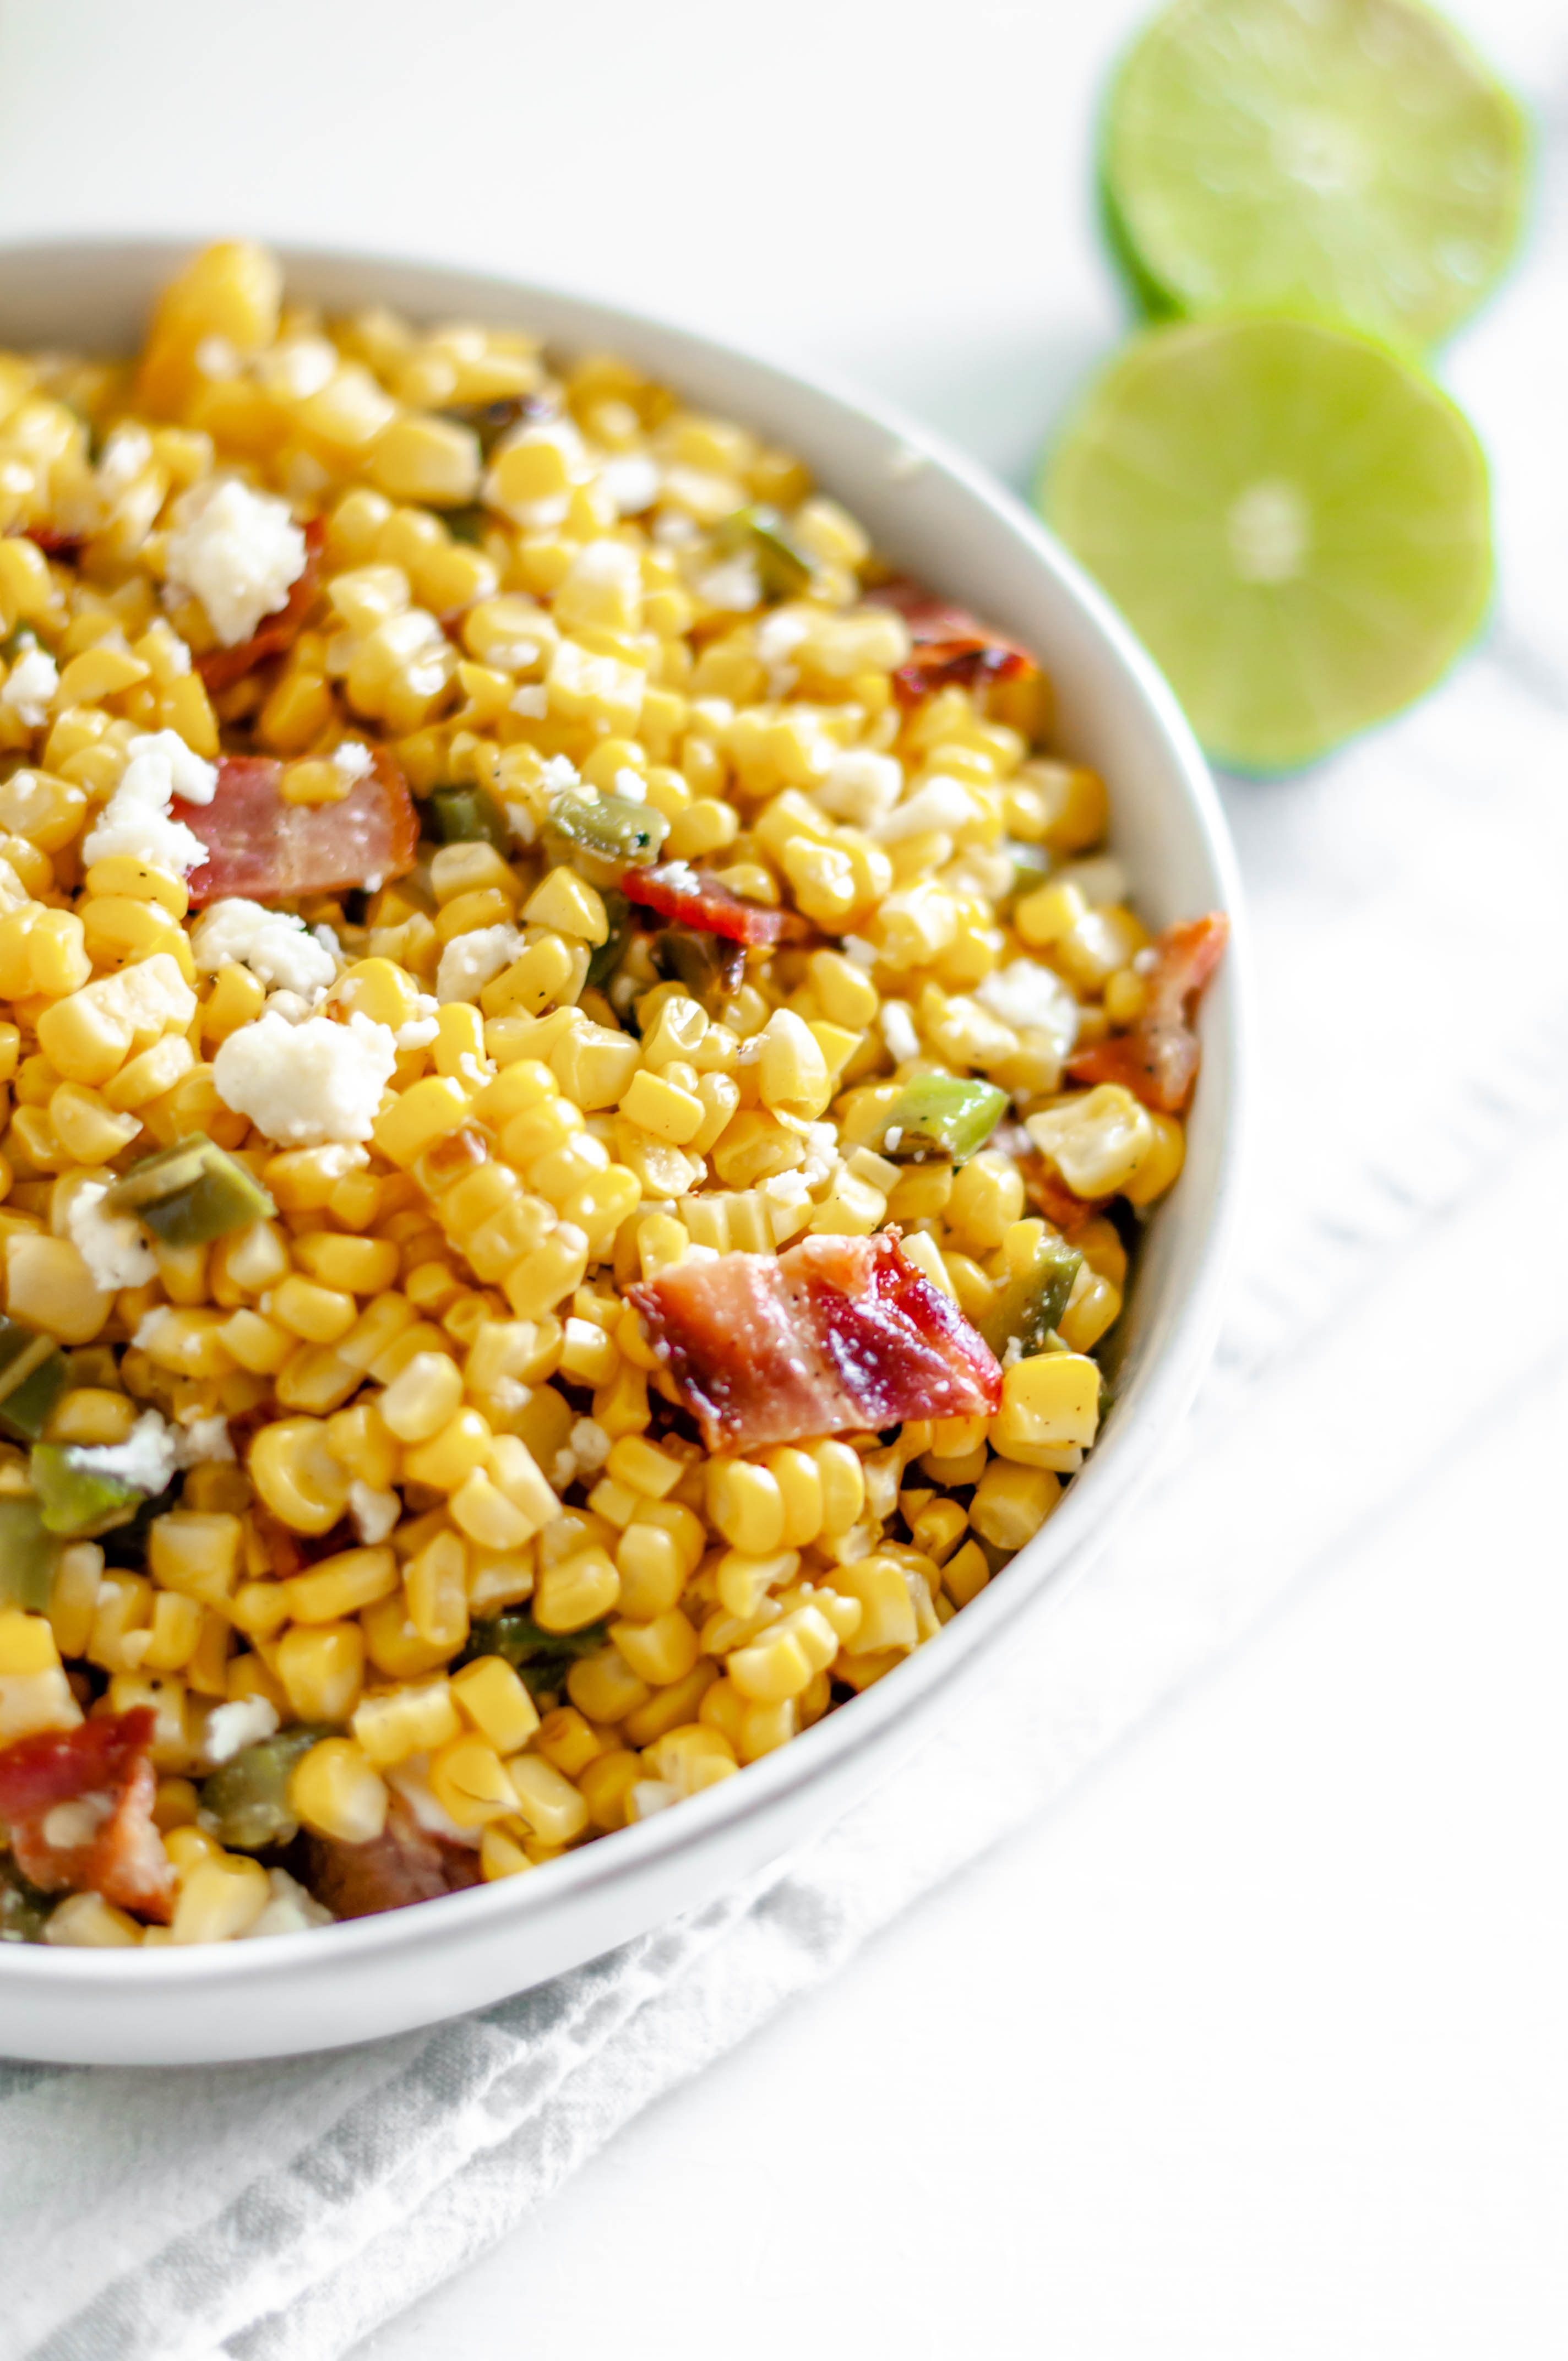 This Grilled Corn Salad with Bacon and Jalapeno is your next potluck dish. Sweet grilled corn, smoky bacon, spicy jalapeno and a bright lime dressing. The perfect addition to any summer barbecue or potluck.